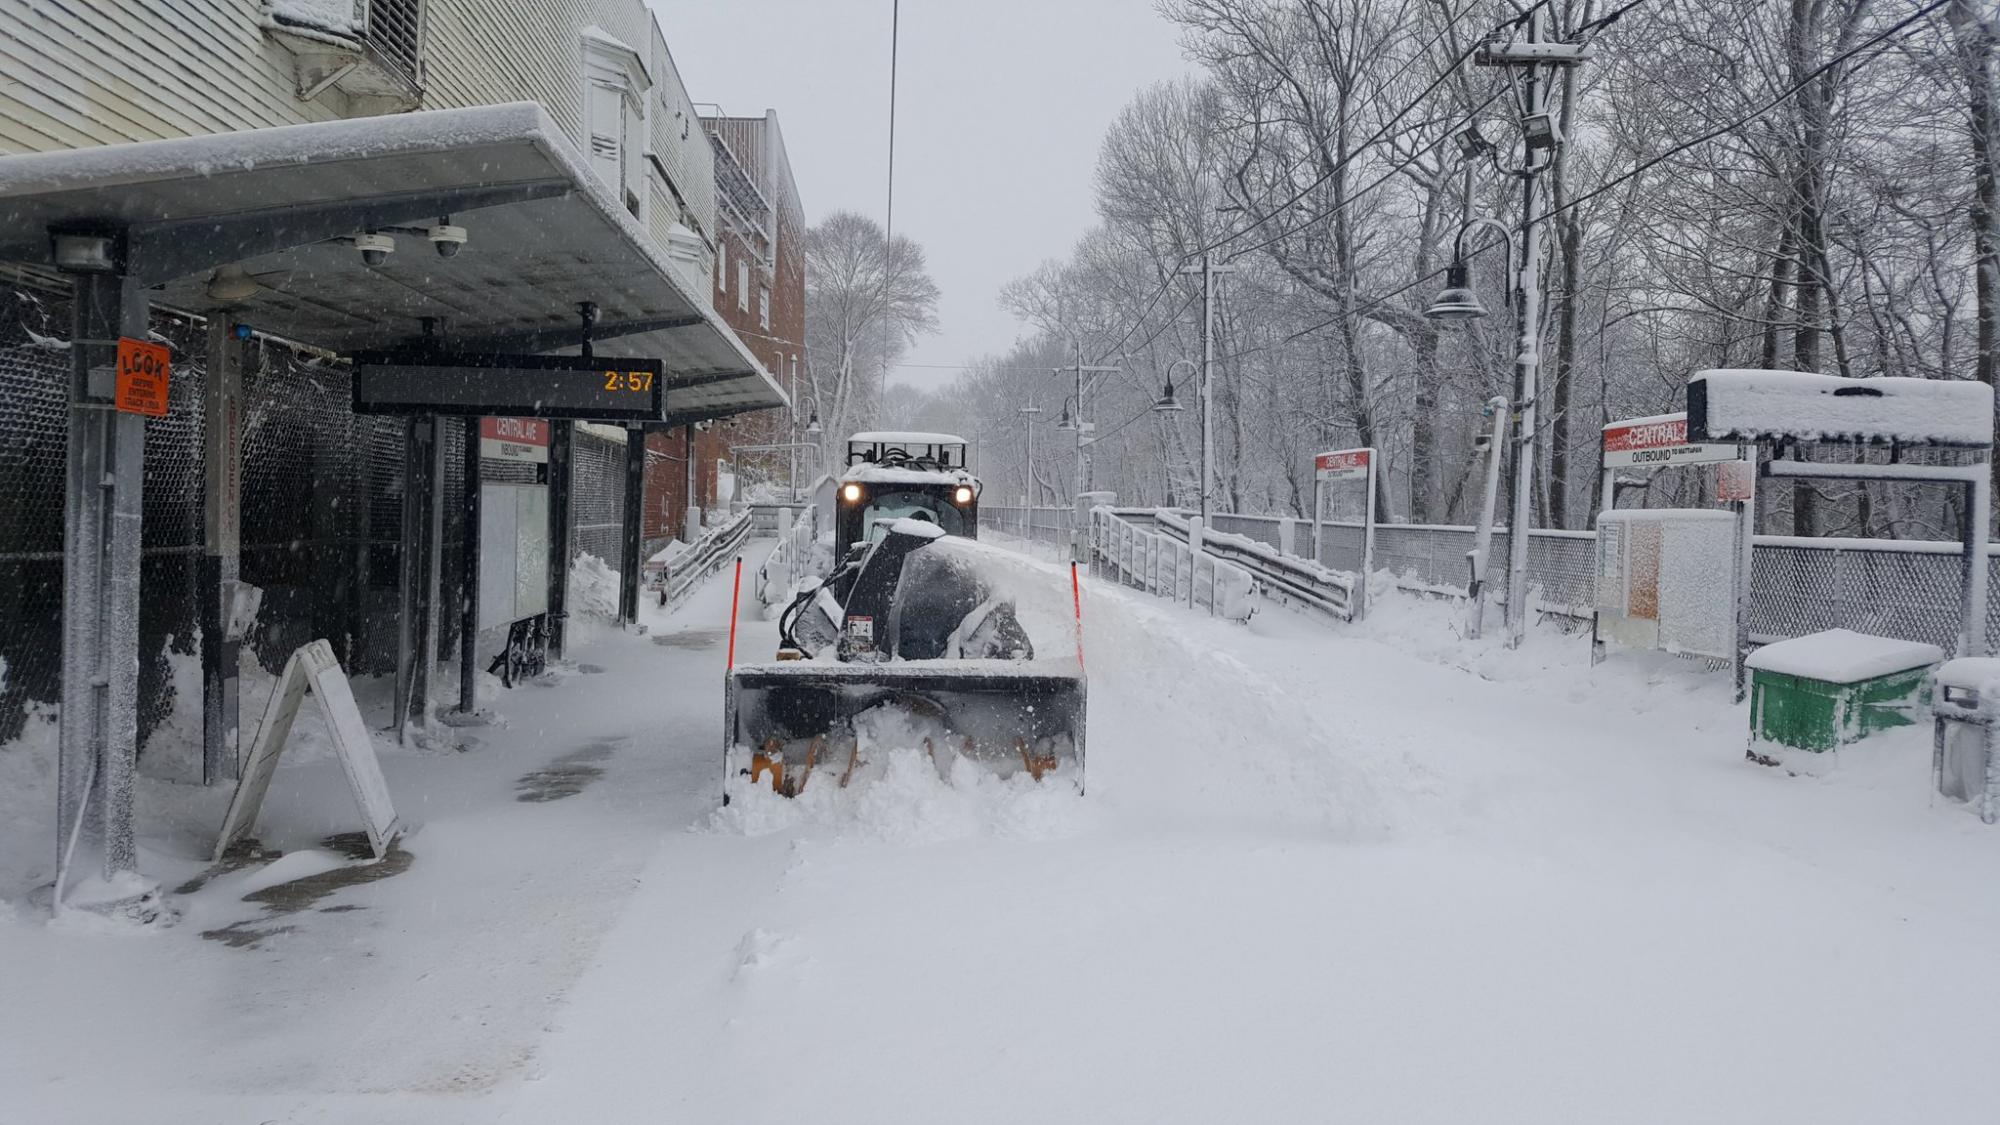 Snow removal plow clears the lines at the Central Ave Station on the Mattapan Line